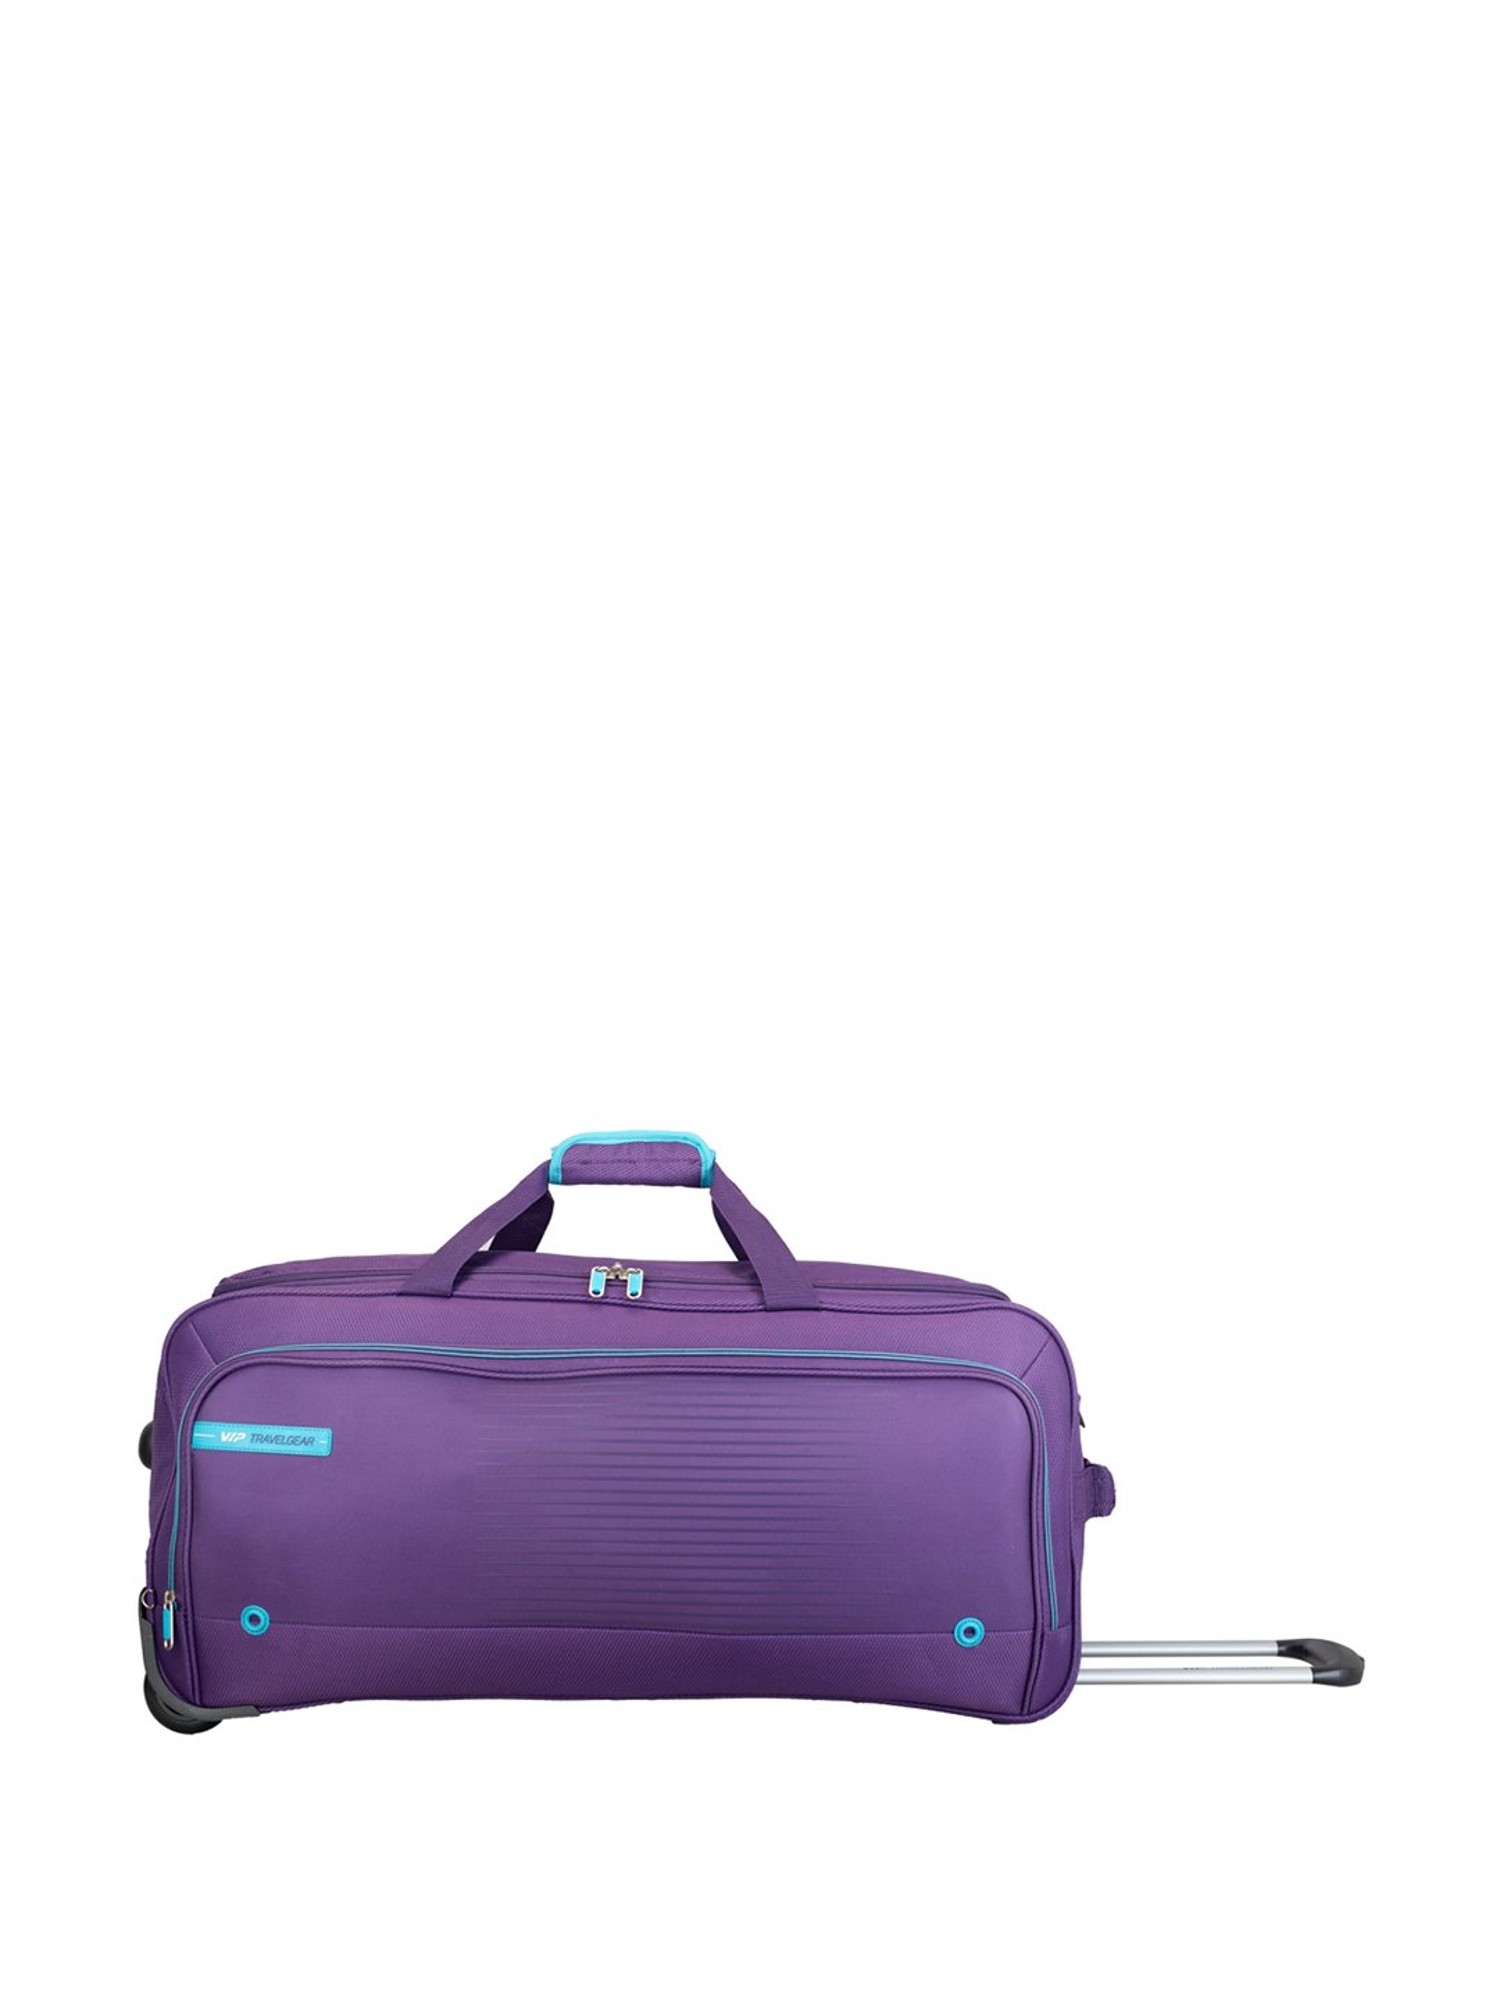 Buy Eliguhnt Tourister Duffle bag for Travel Online at Best Prices in India   JioMart